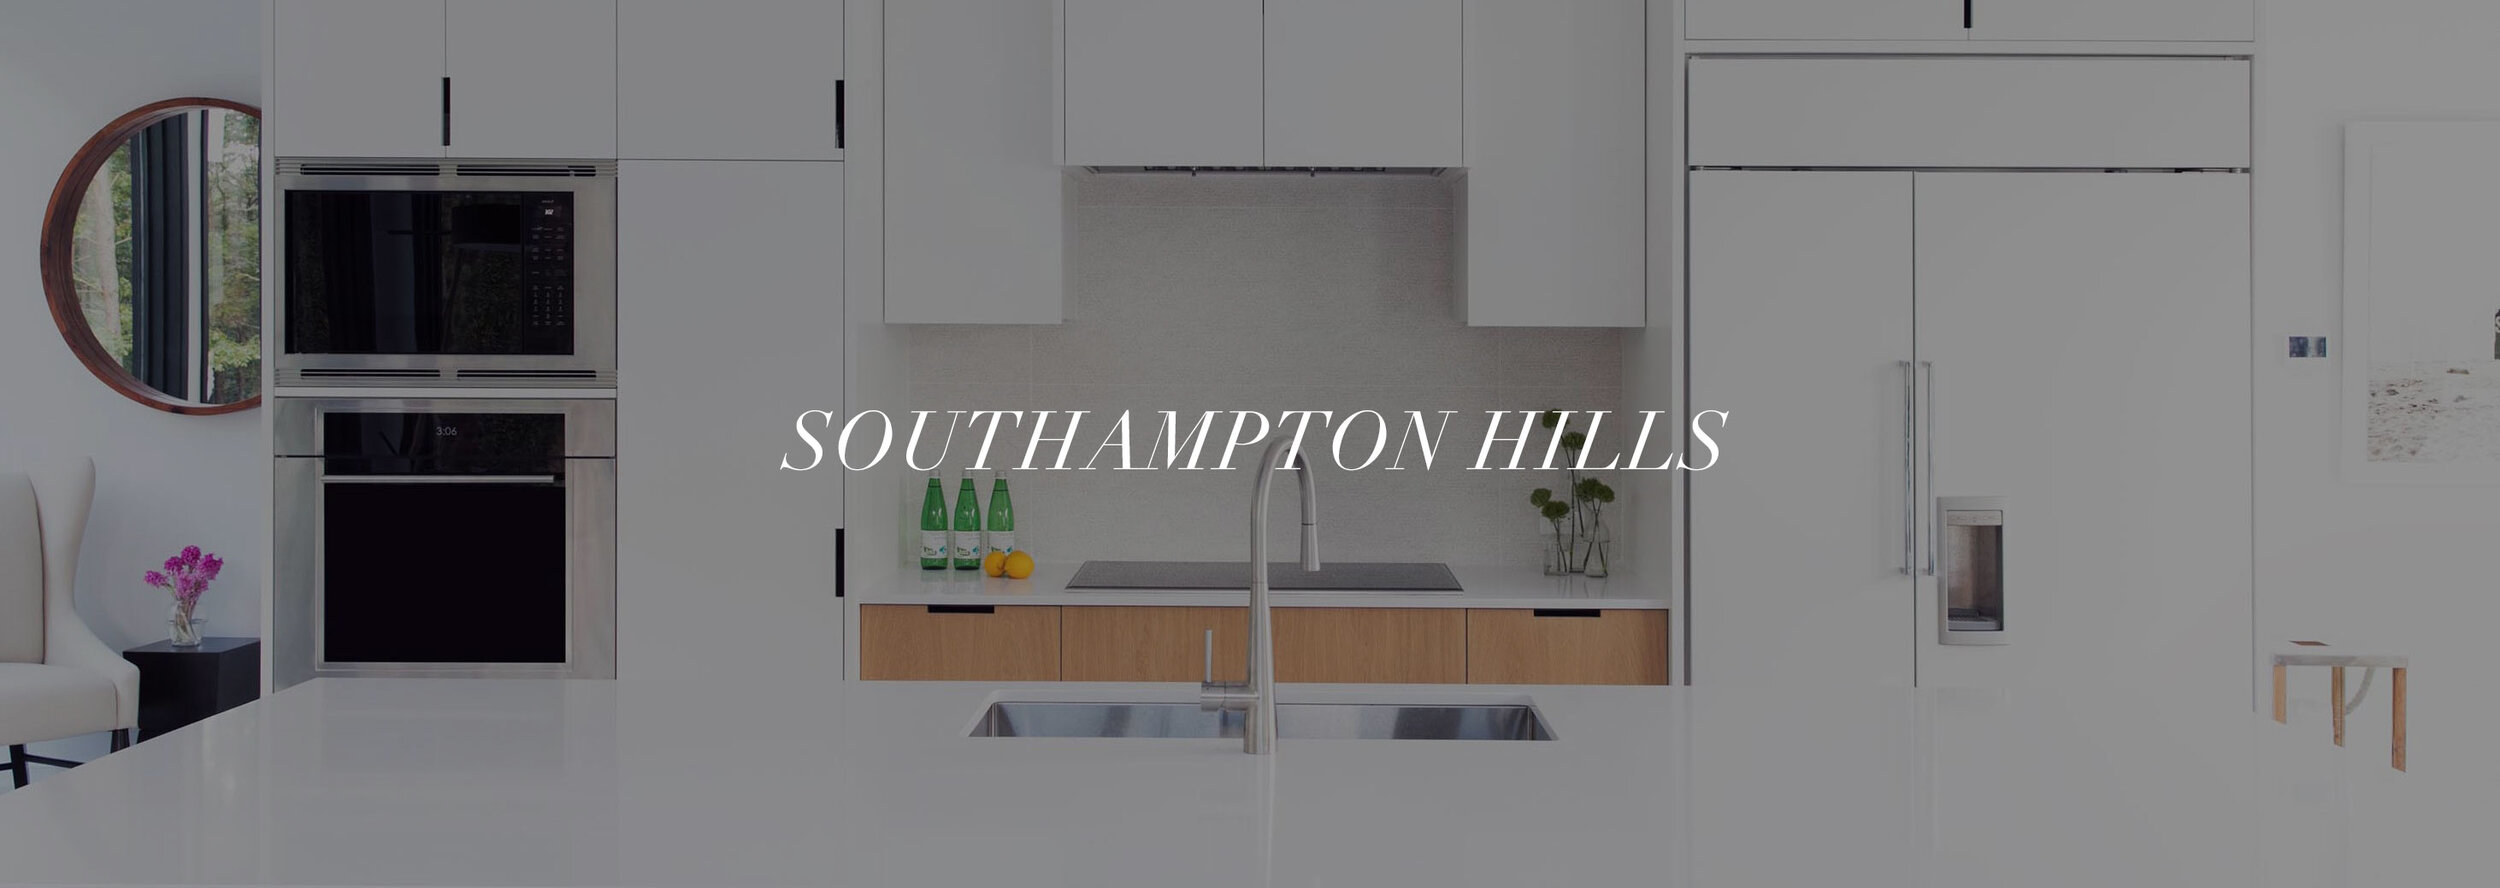 Look Inside a ShingleStyle Home in Southampton  Architectural Digest